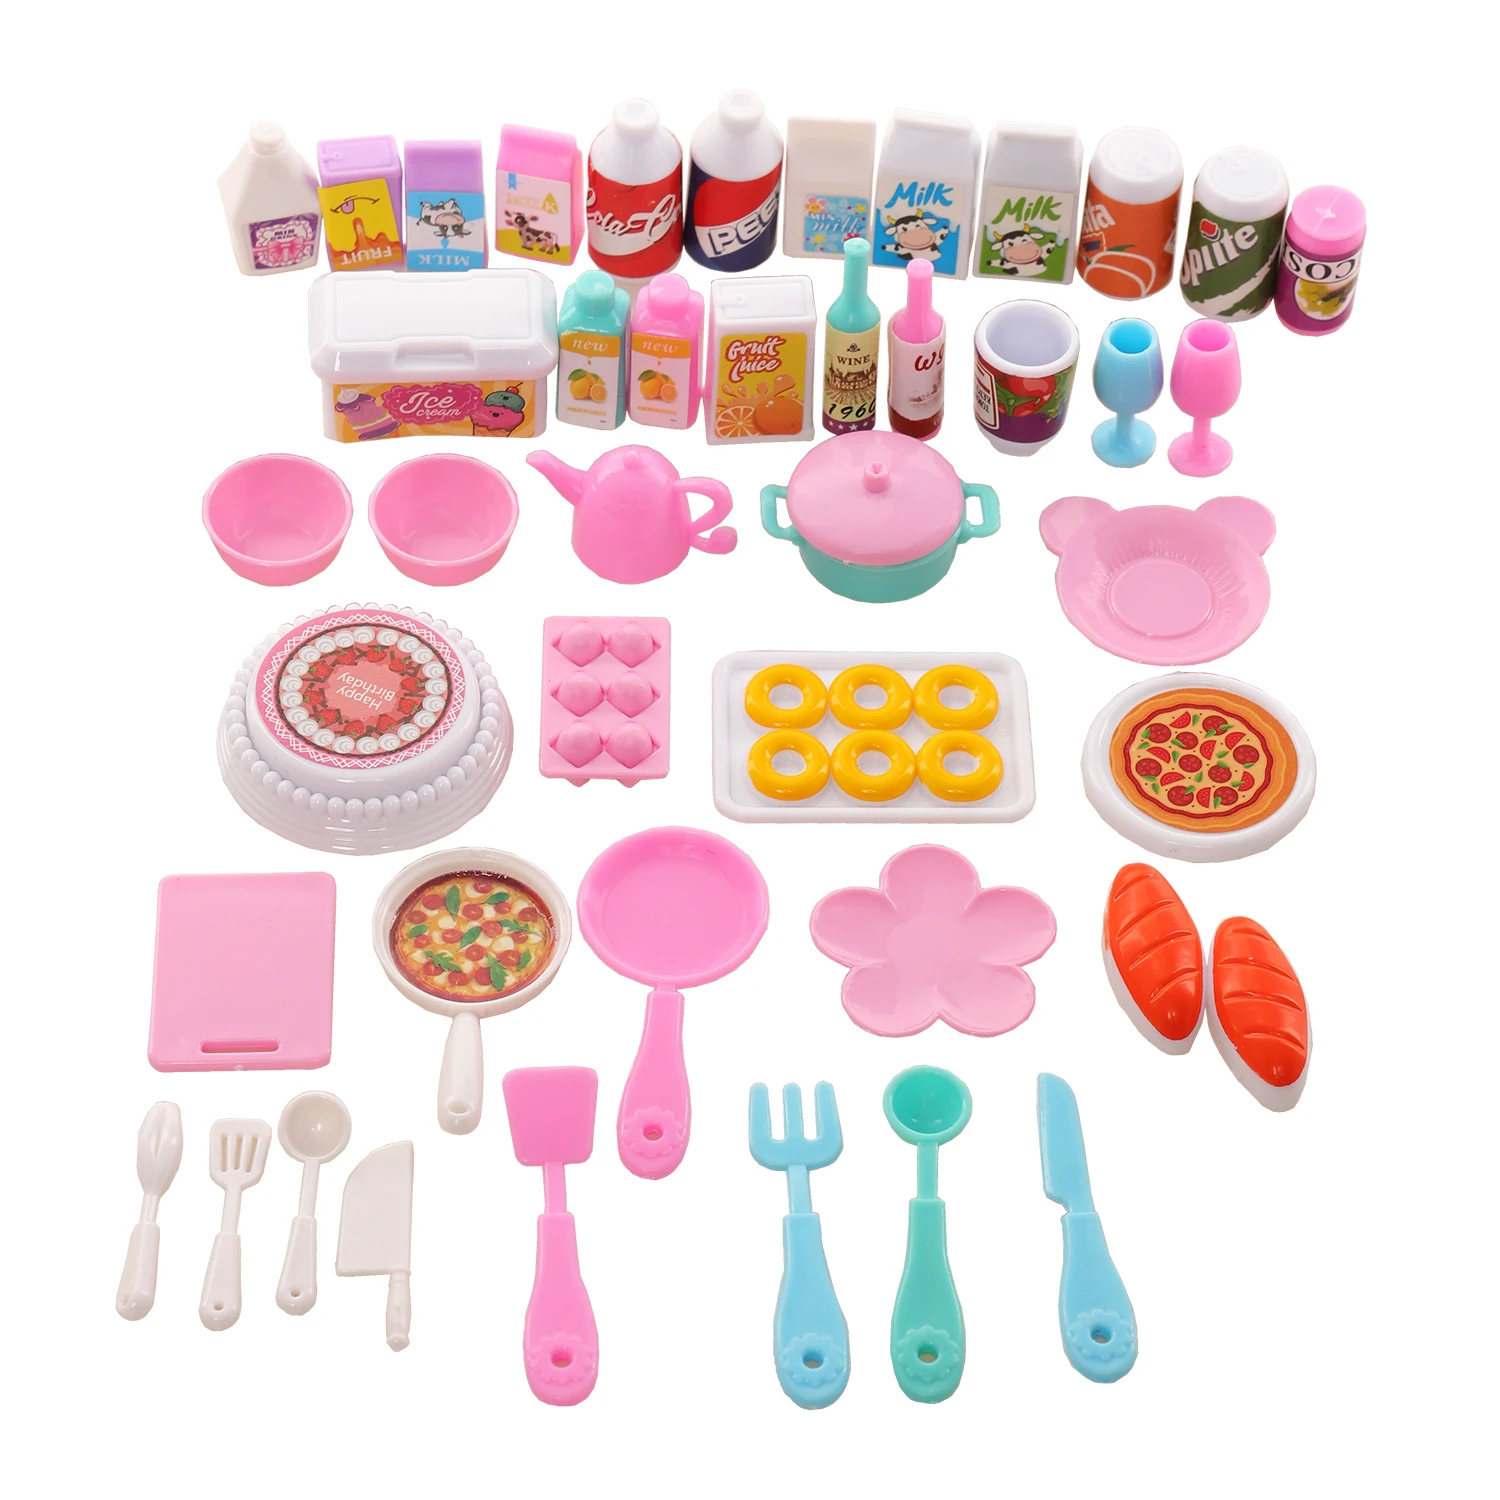 Dollhouse Mini Kitchen Food for Barbie 43 Pcs Dinner Set Fork Knif Plate Pizza Soup Tableware Cute Kids Toys Doll Accessories sashimi dry ice plate salmon hotel molecular cuisine artistic food tableware creative smoke dry ice plate